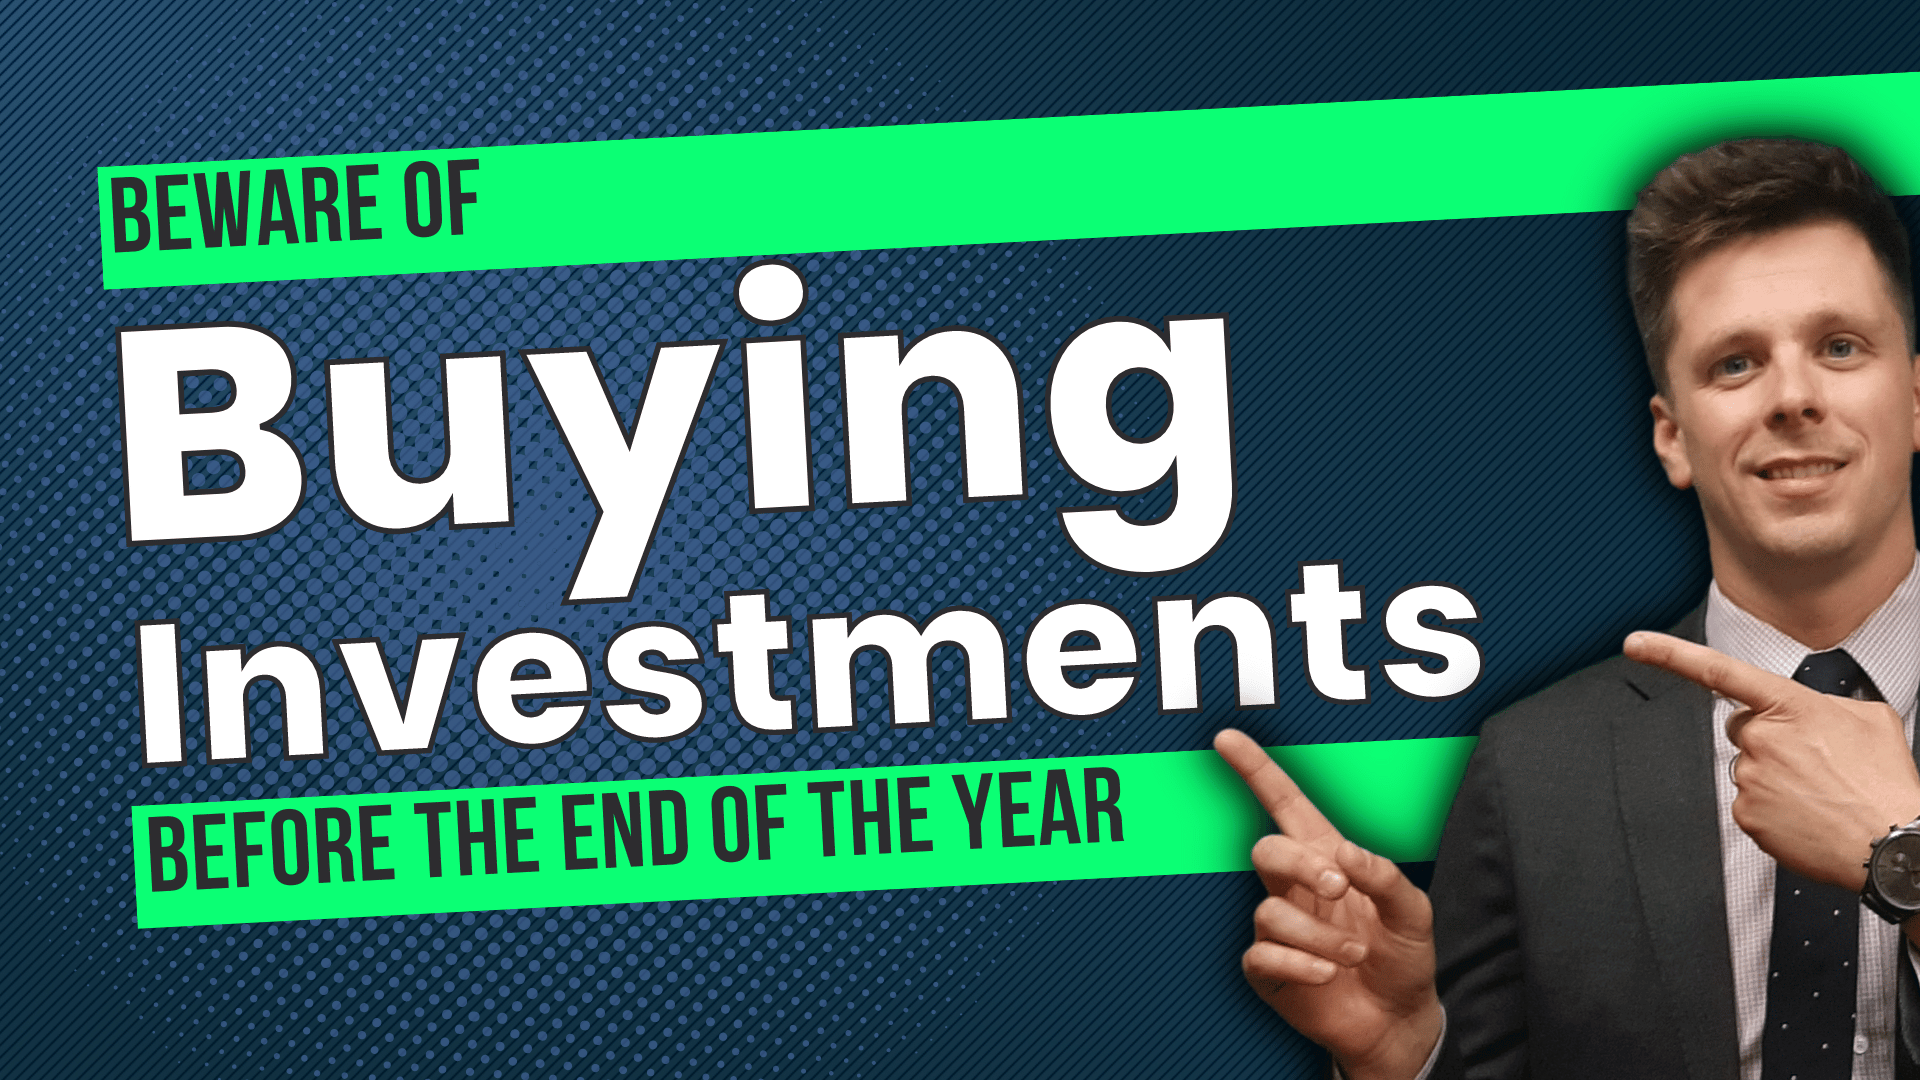 Beware of Buying Investments before the end of the year